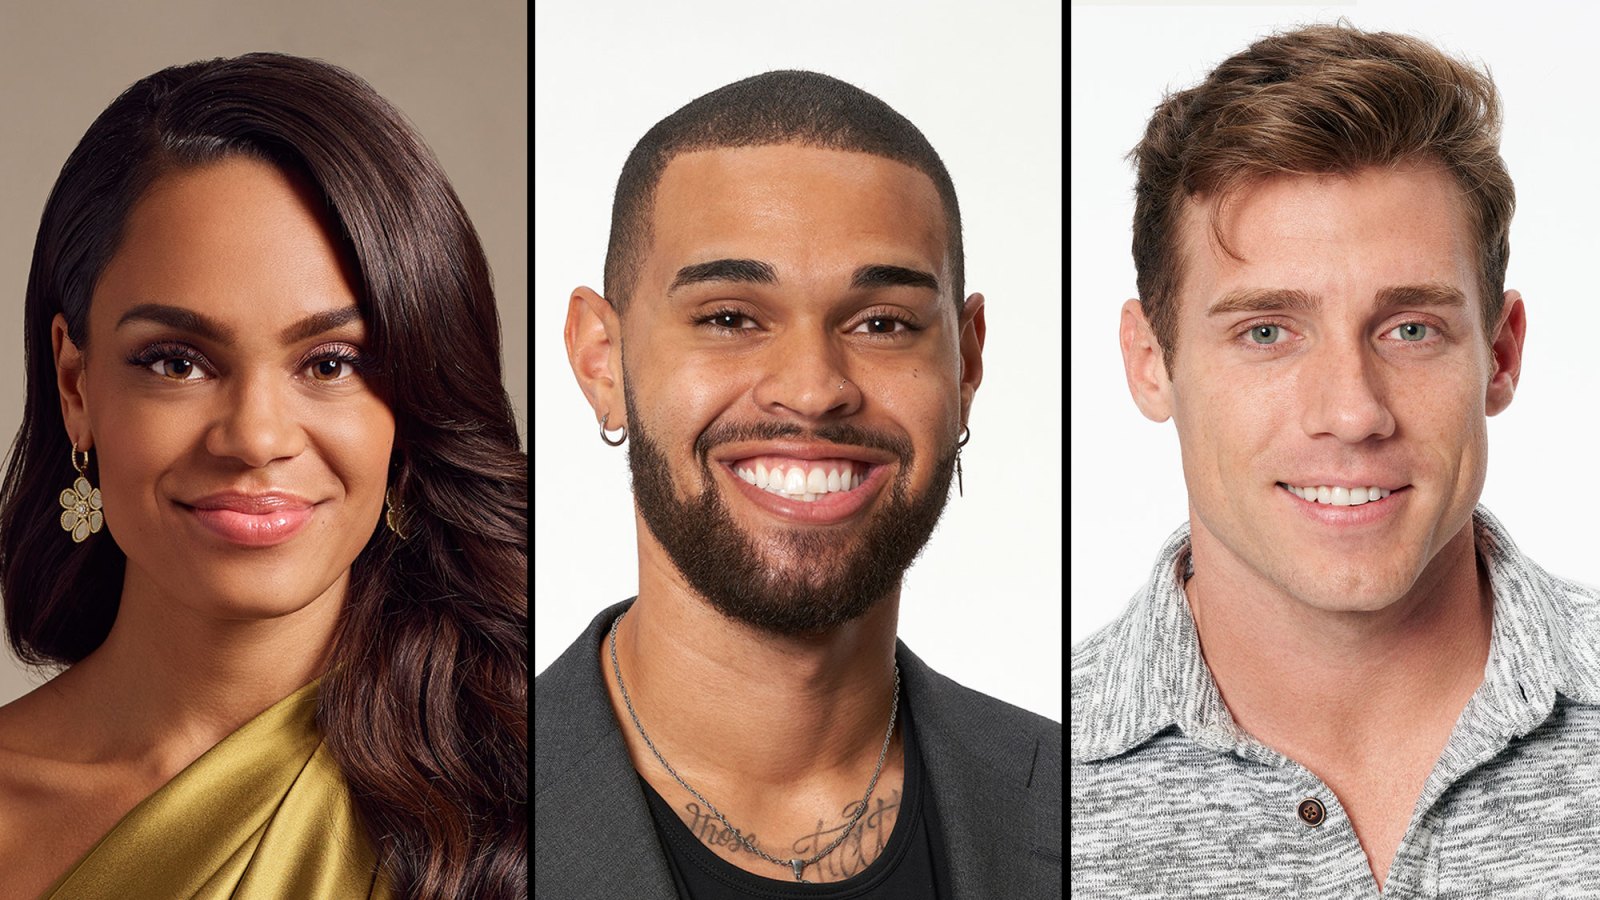 The Bachelorette Recap Michelle Young Deals With Nayte and Chris S. Drama After Feeling Unseen